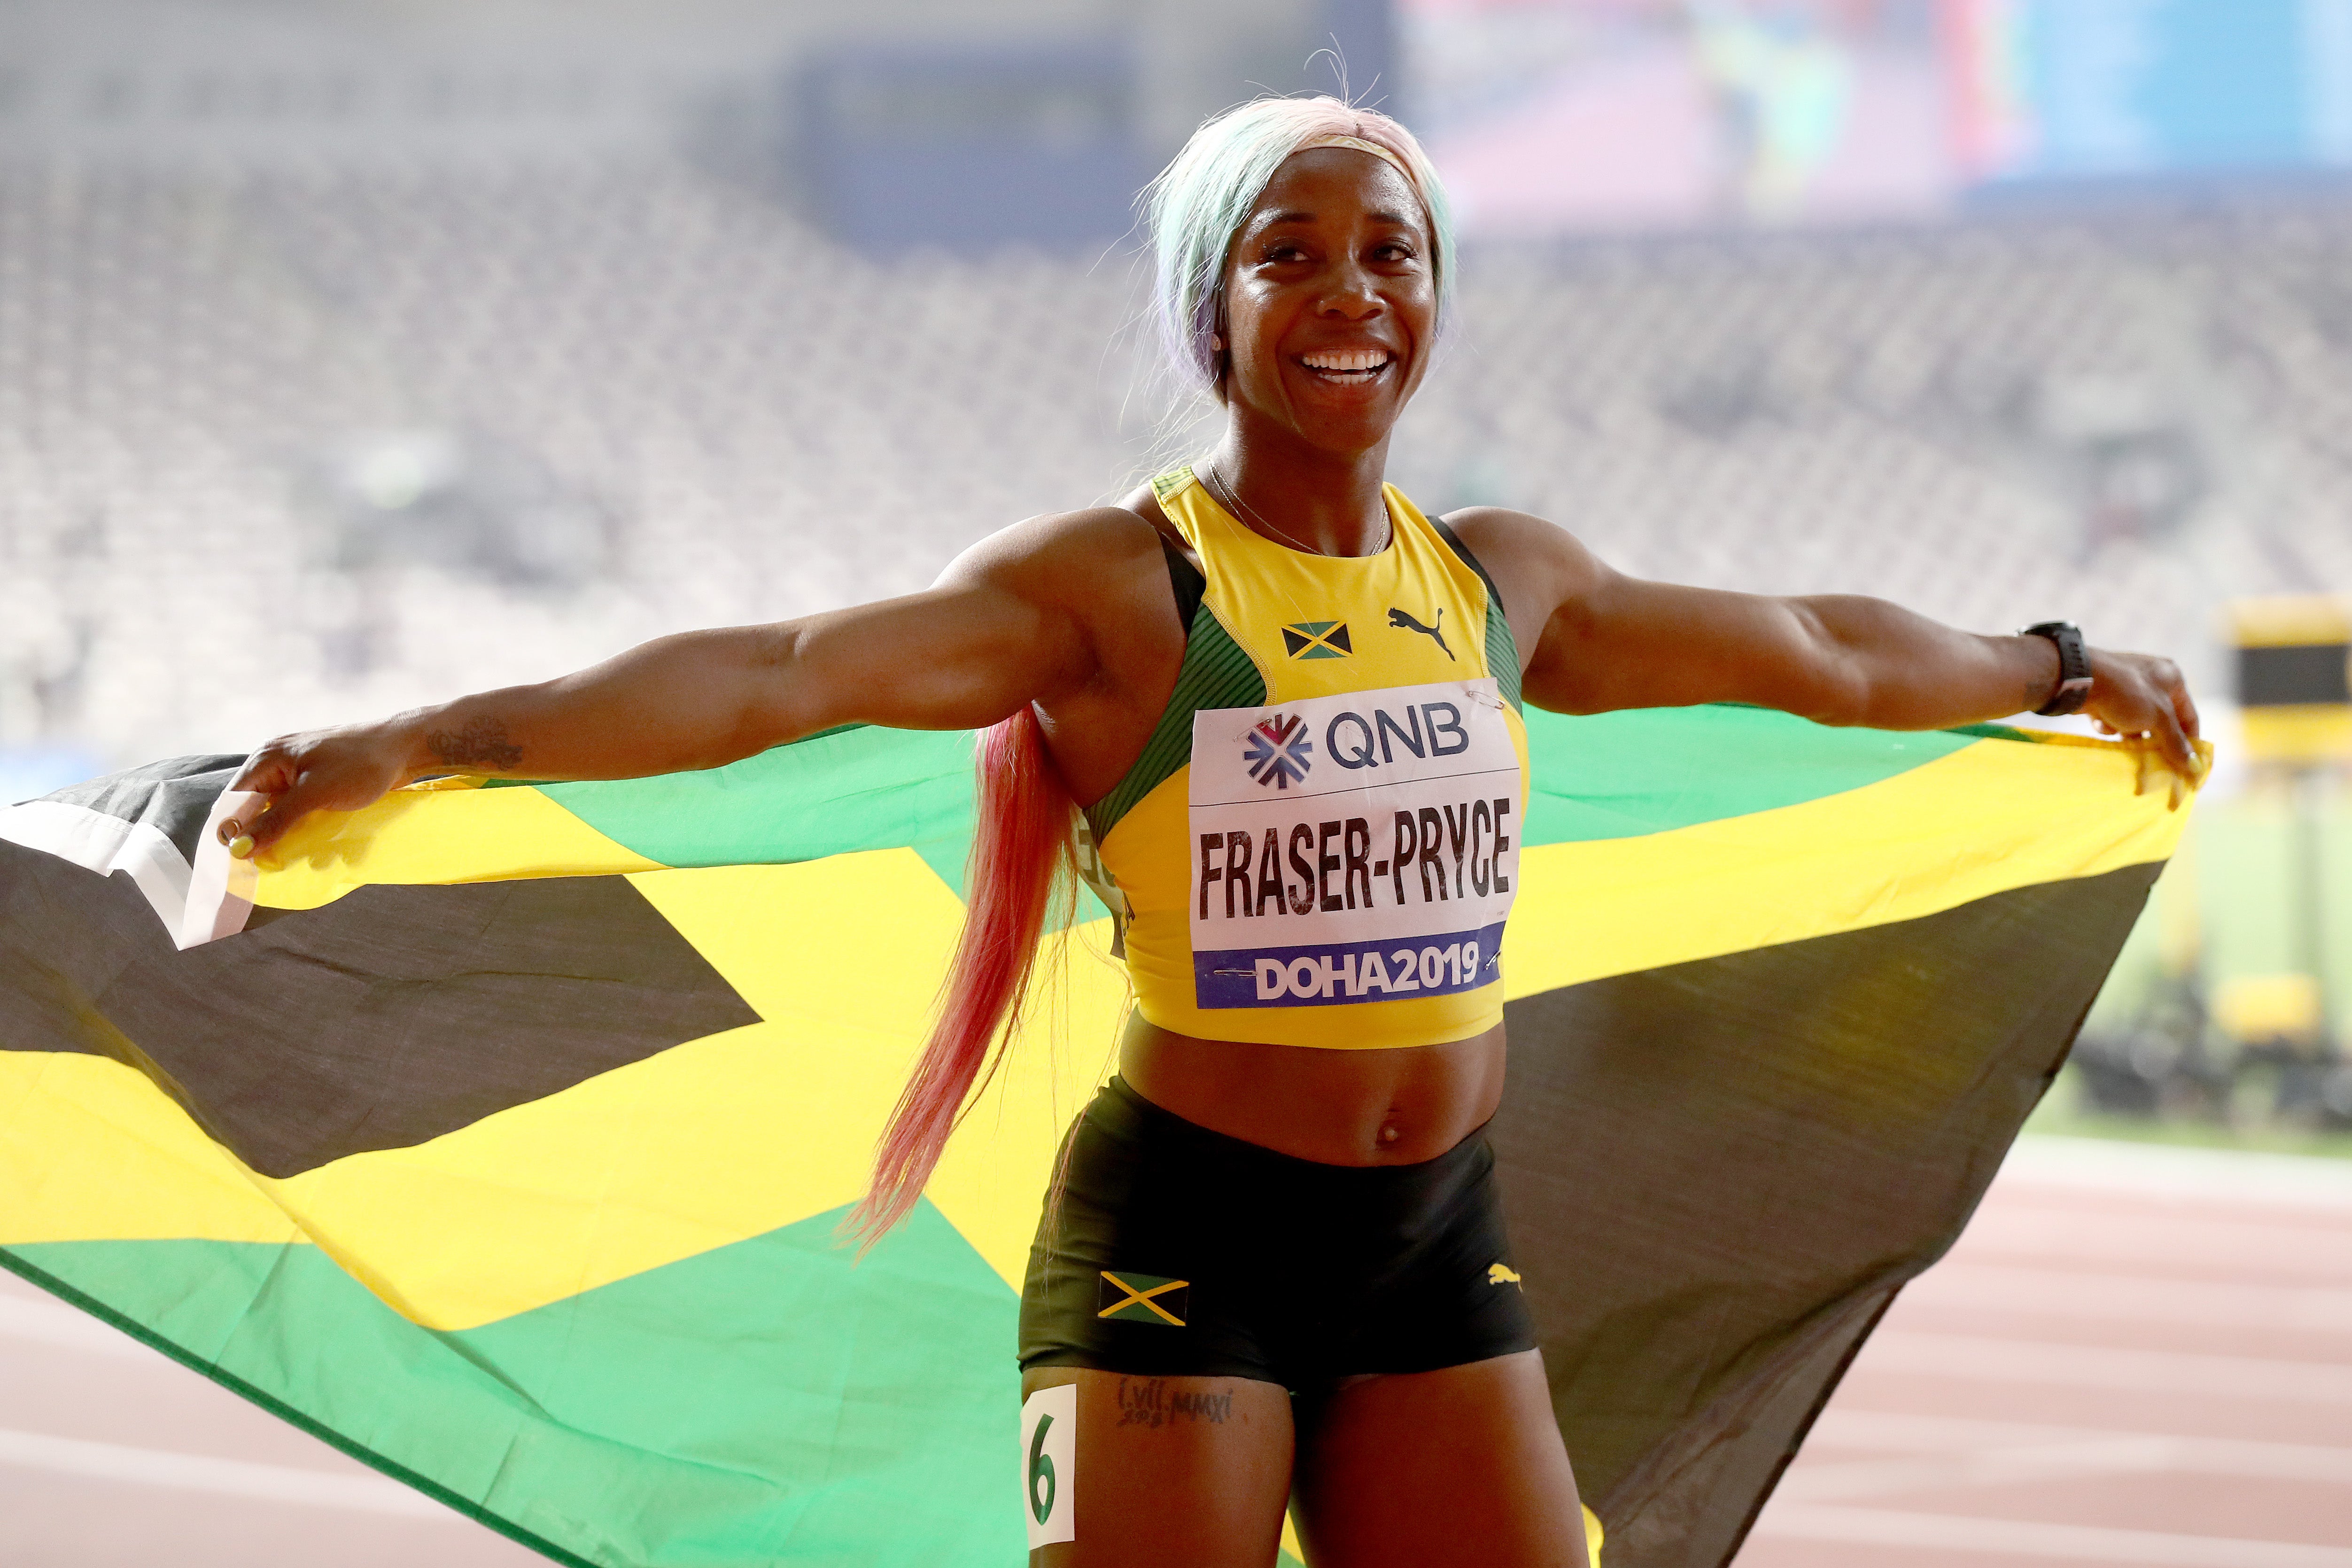 Shelly-Ann Fraser-Pryce returned to the top of the sprinting game with her world title in the 100m in 2019